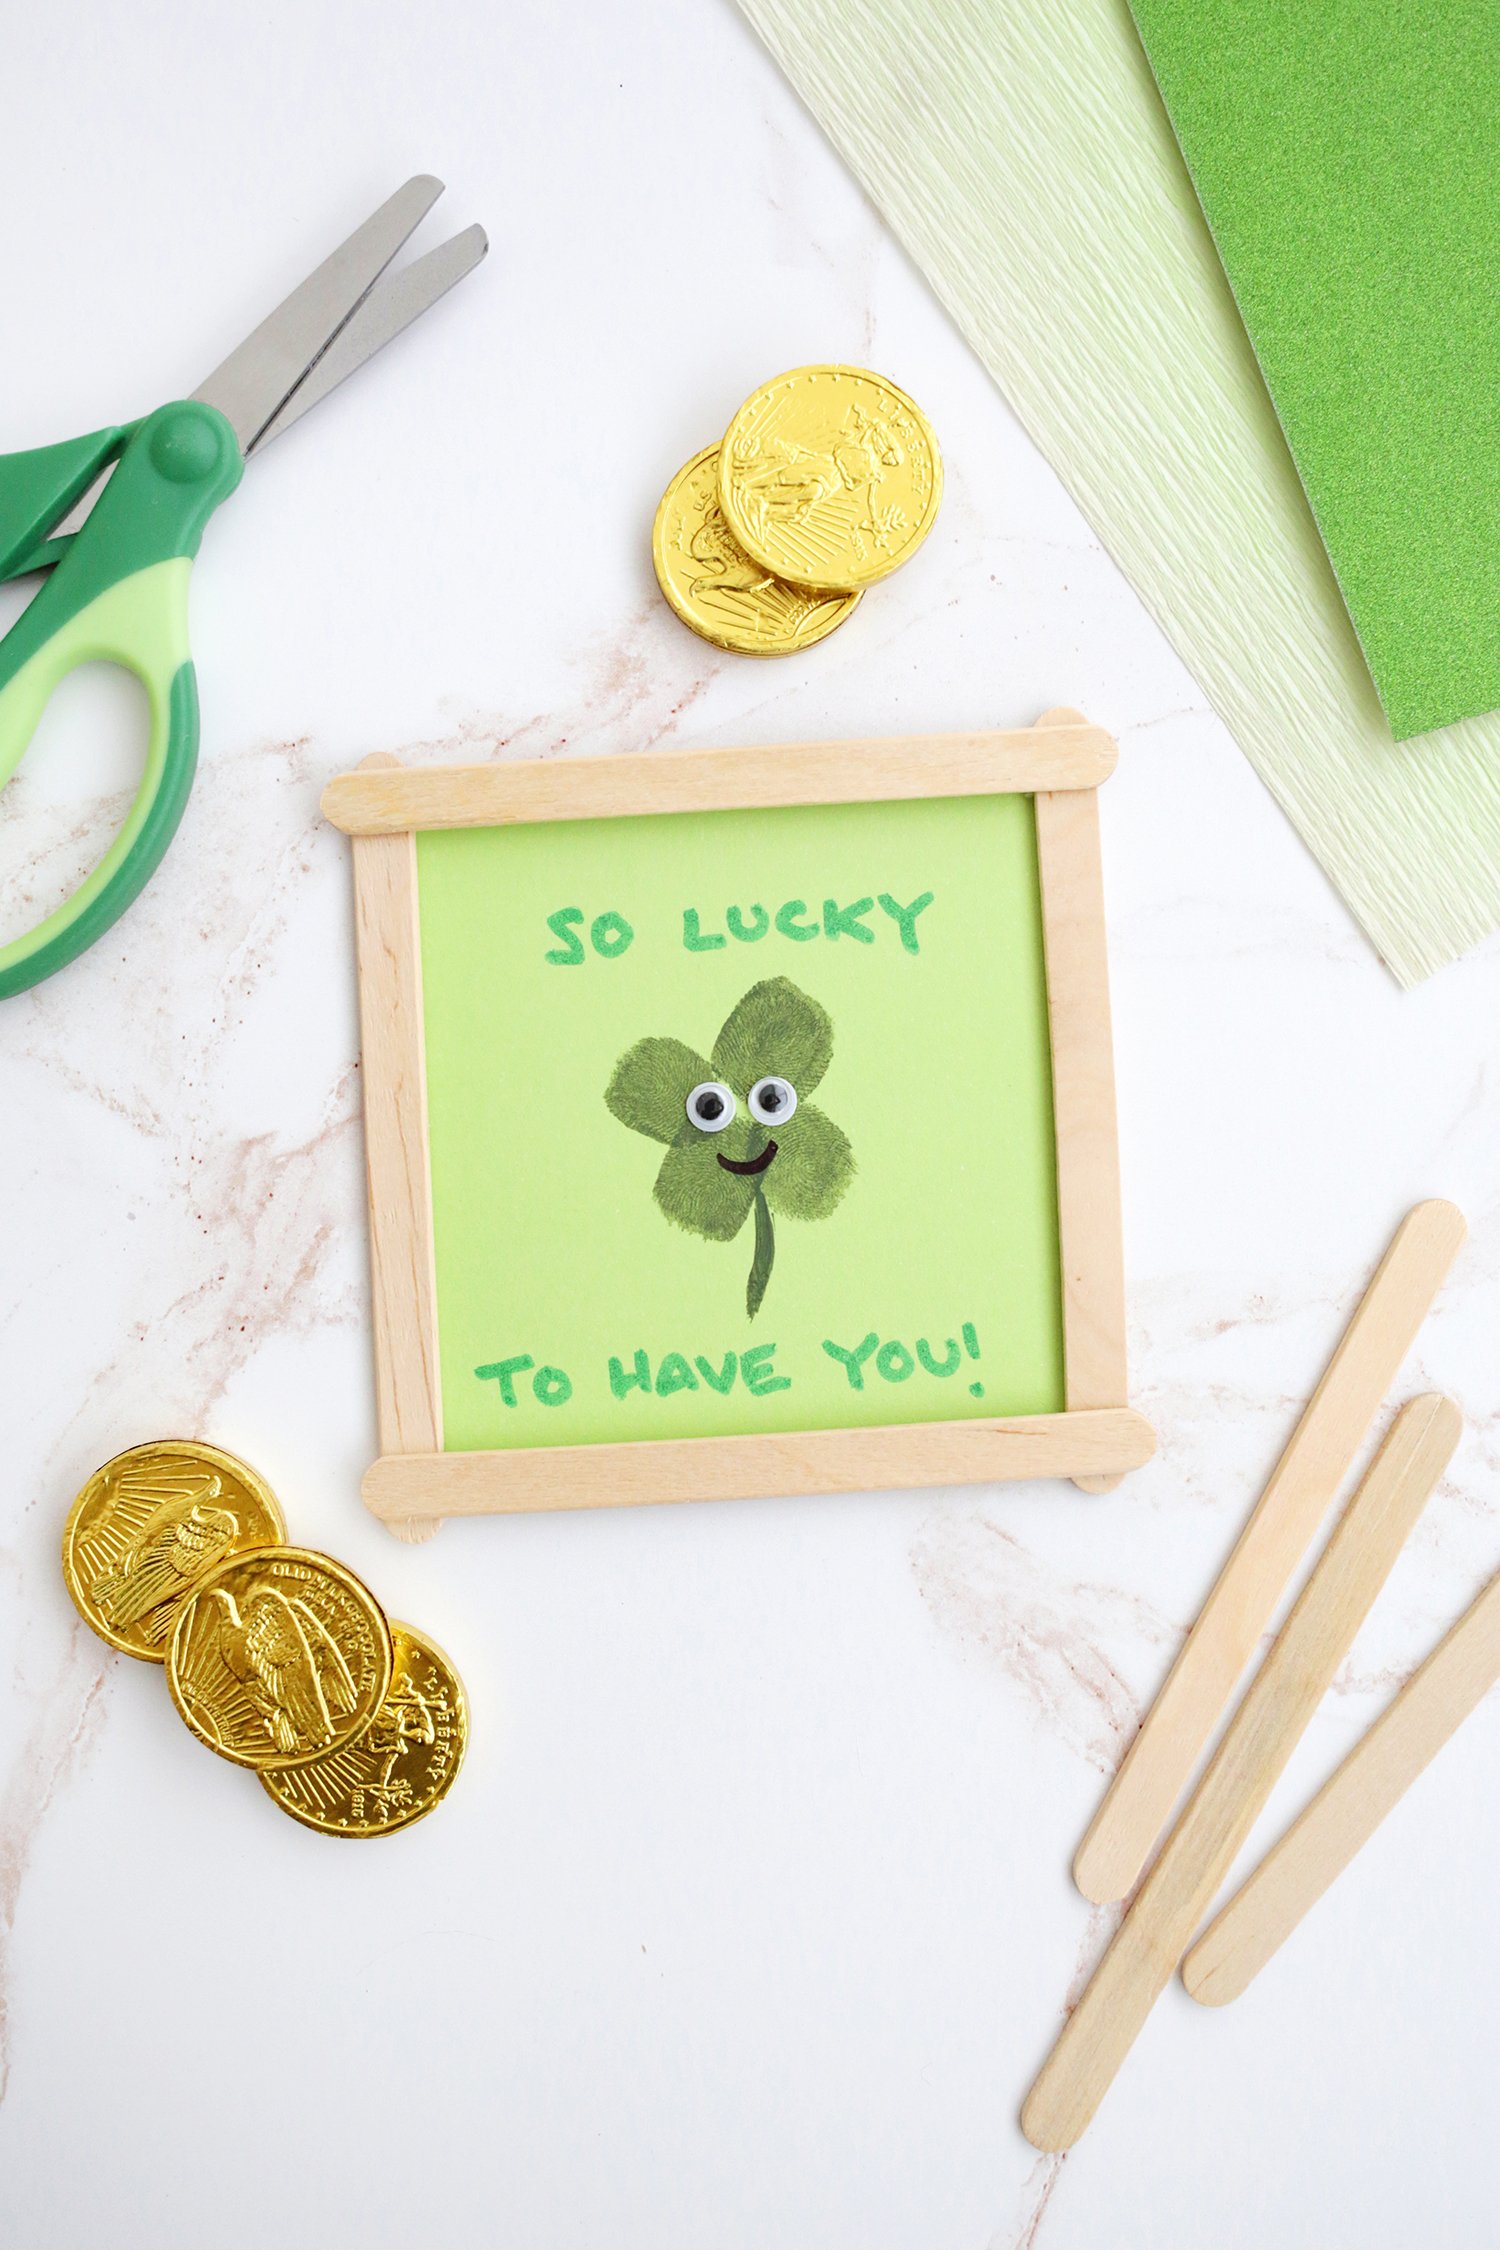 Four leaf clover fingerprint craft that says "so lucky to have you"